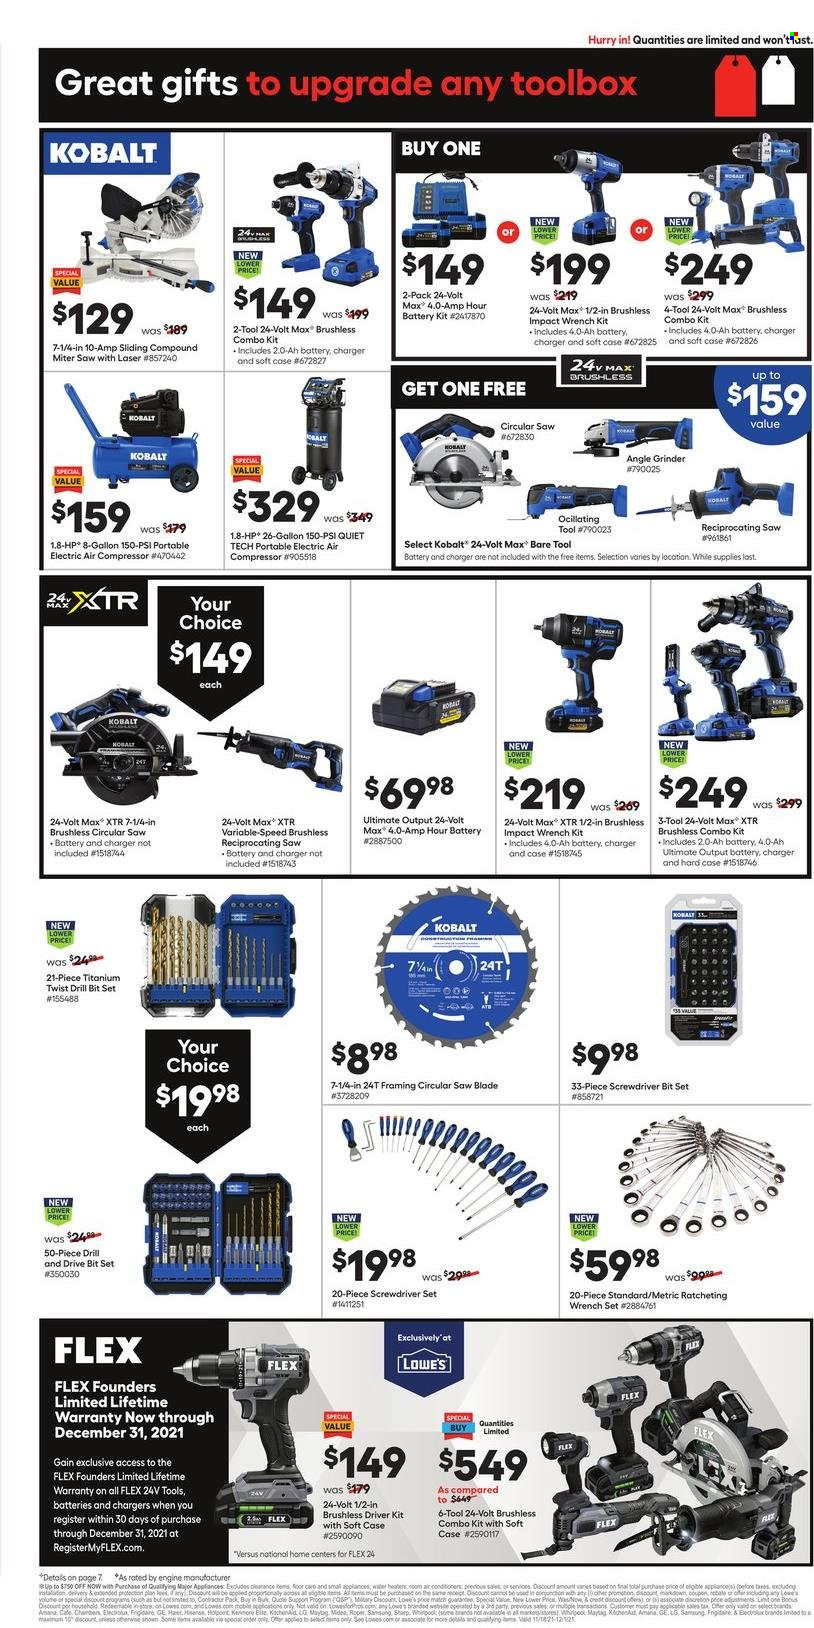 thumbnail - Lowe's Flyer - 11/25/2021 - 12/01/2021 - Sales products - Gain, Sharp, battery charger, LG, Hewlett Packard, Midea, Amana, Maytag, grinder, drill bit set, circular saw blade, circular saw, saw, angle grinder, reciprocating saw, screwdriver bits, tool box, combo kit, wrench set, air compressor. Page 5.